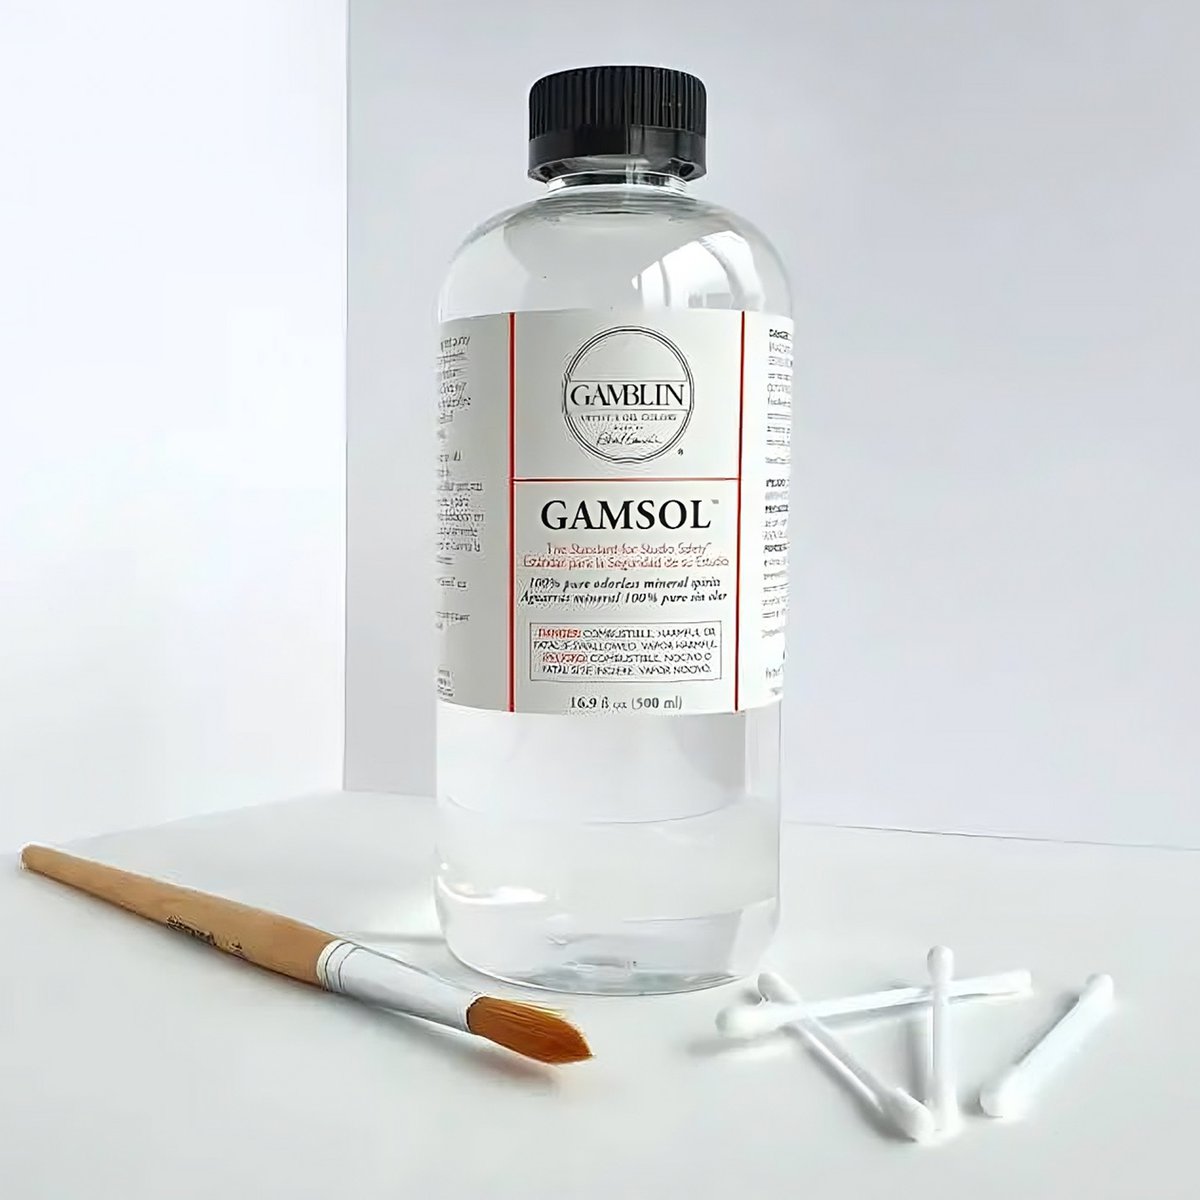 How to Blend Colored Pencils With Gamsol (Mineral Spirits), jar, cotton,  mineral